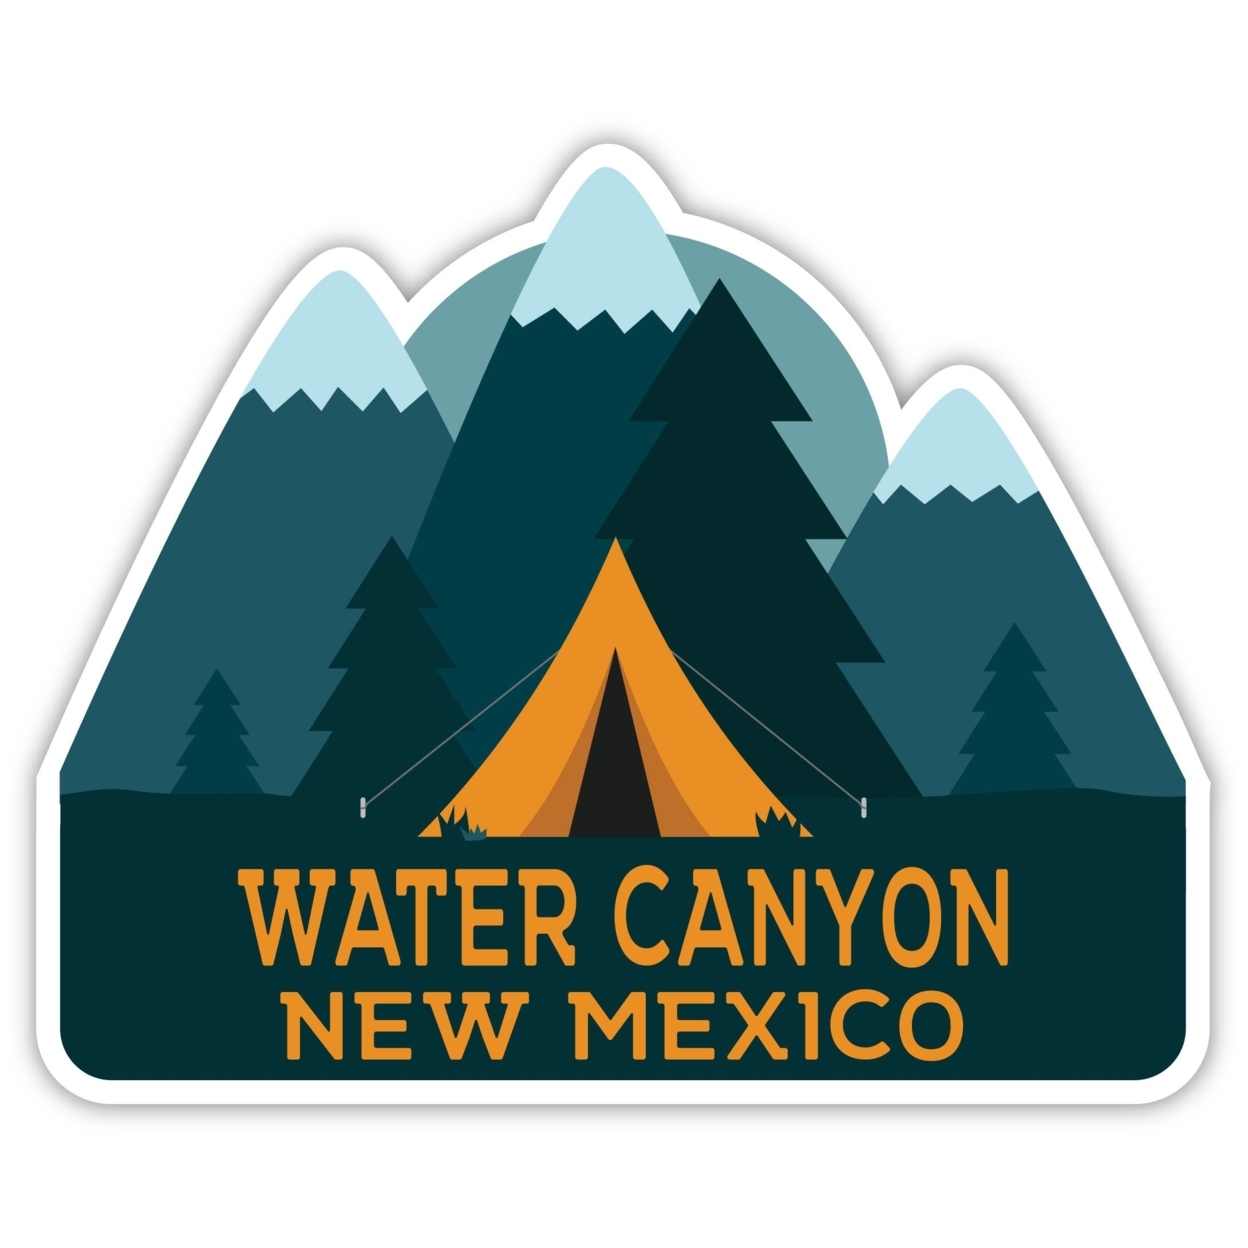 Water Canyon New Mexico Souvenir Decorative Stickers (Choose Theme And Size) - Single Unit, 2-Inch, Tent